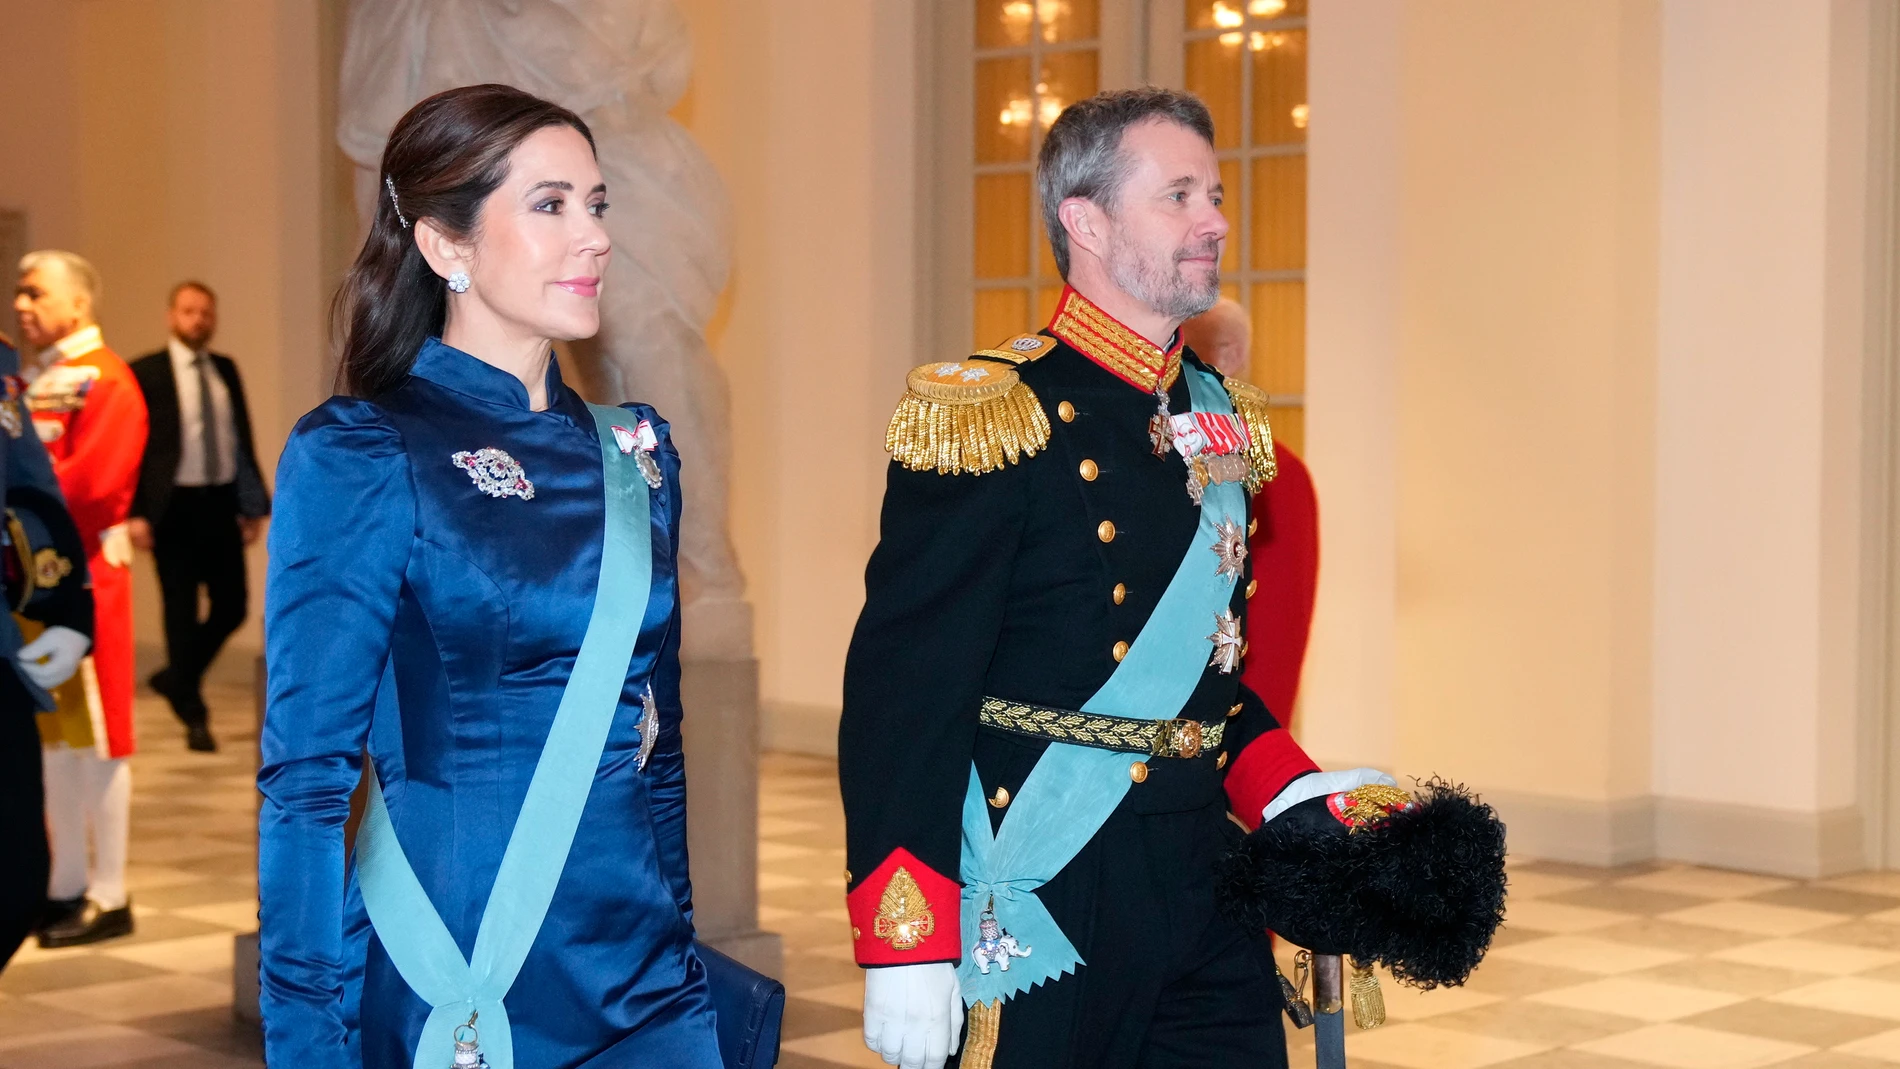 Copenhagen (Denmark), 03/01/2024.- Denmark's Crown Prince Frederik (R) and Crown Princess Mary arrive to greet the diplomatic corps on the occasion of the New Year at Christiansborg Palace in Copenhagen, Denmark, 03 January 2024. Queen Margrethe II, 83, who has reigned for 52 years, on 31 December 2023 announced that she would step down as regent on 14 January 2024, the 52nd anniversary of her accession to the throne. Her son, Crown Prince Frederik, will take over the throne as King Frederik ...